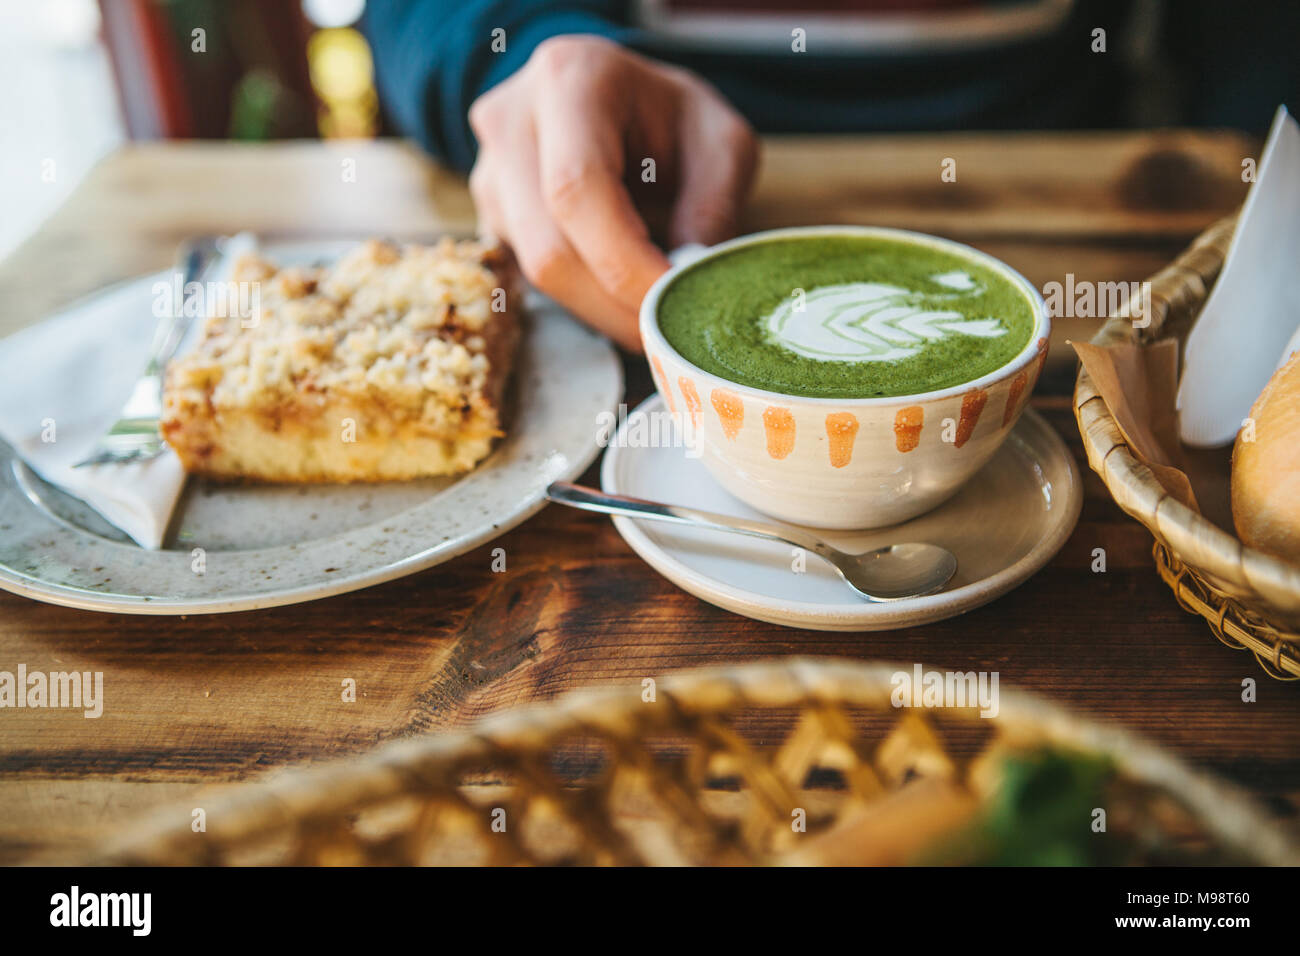 Close-up - man's hand holding mug of green tea with beautiful pattern in the form of white foam next to dessert Stock Photo